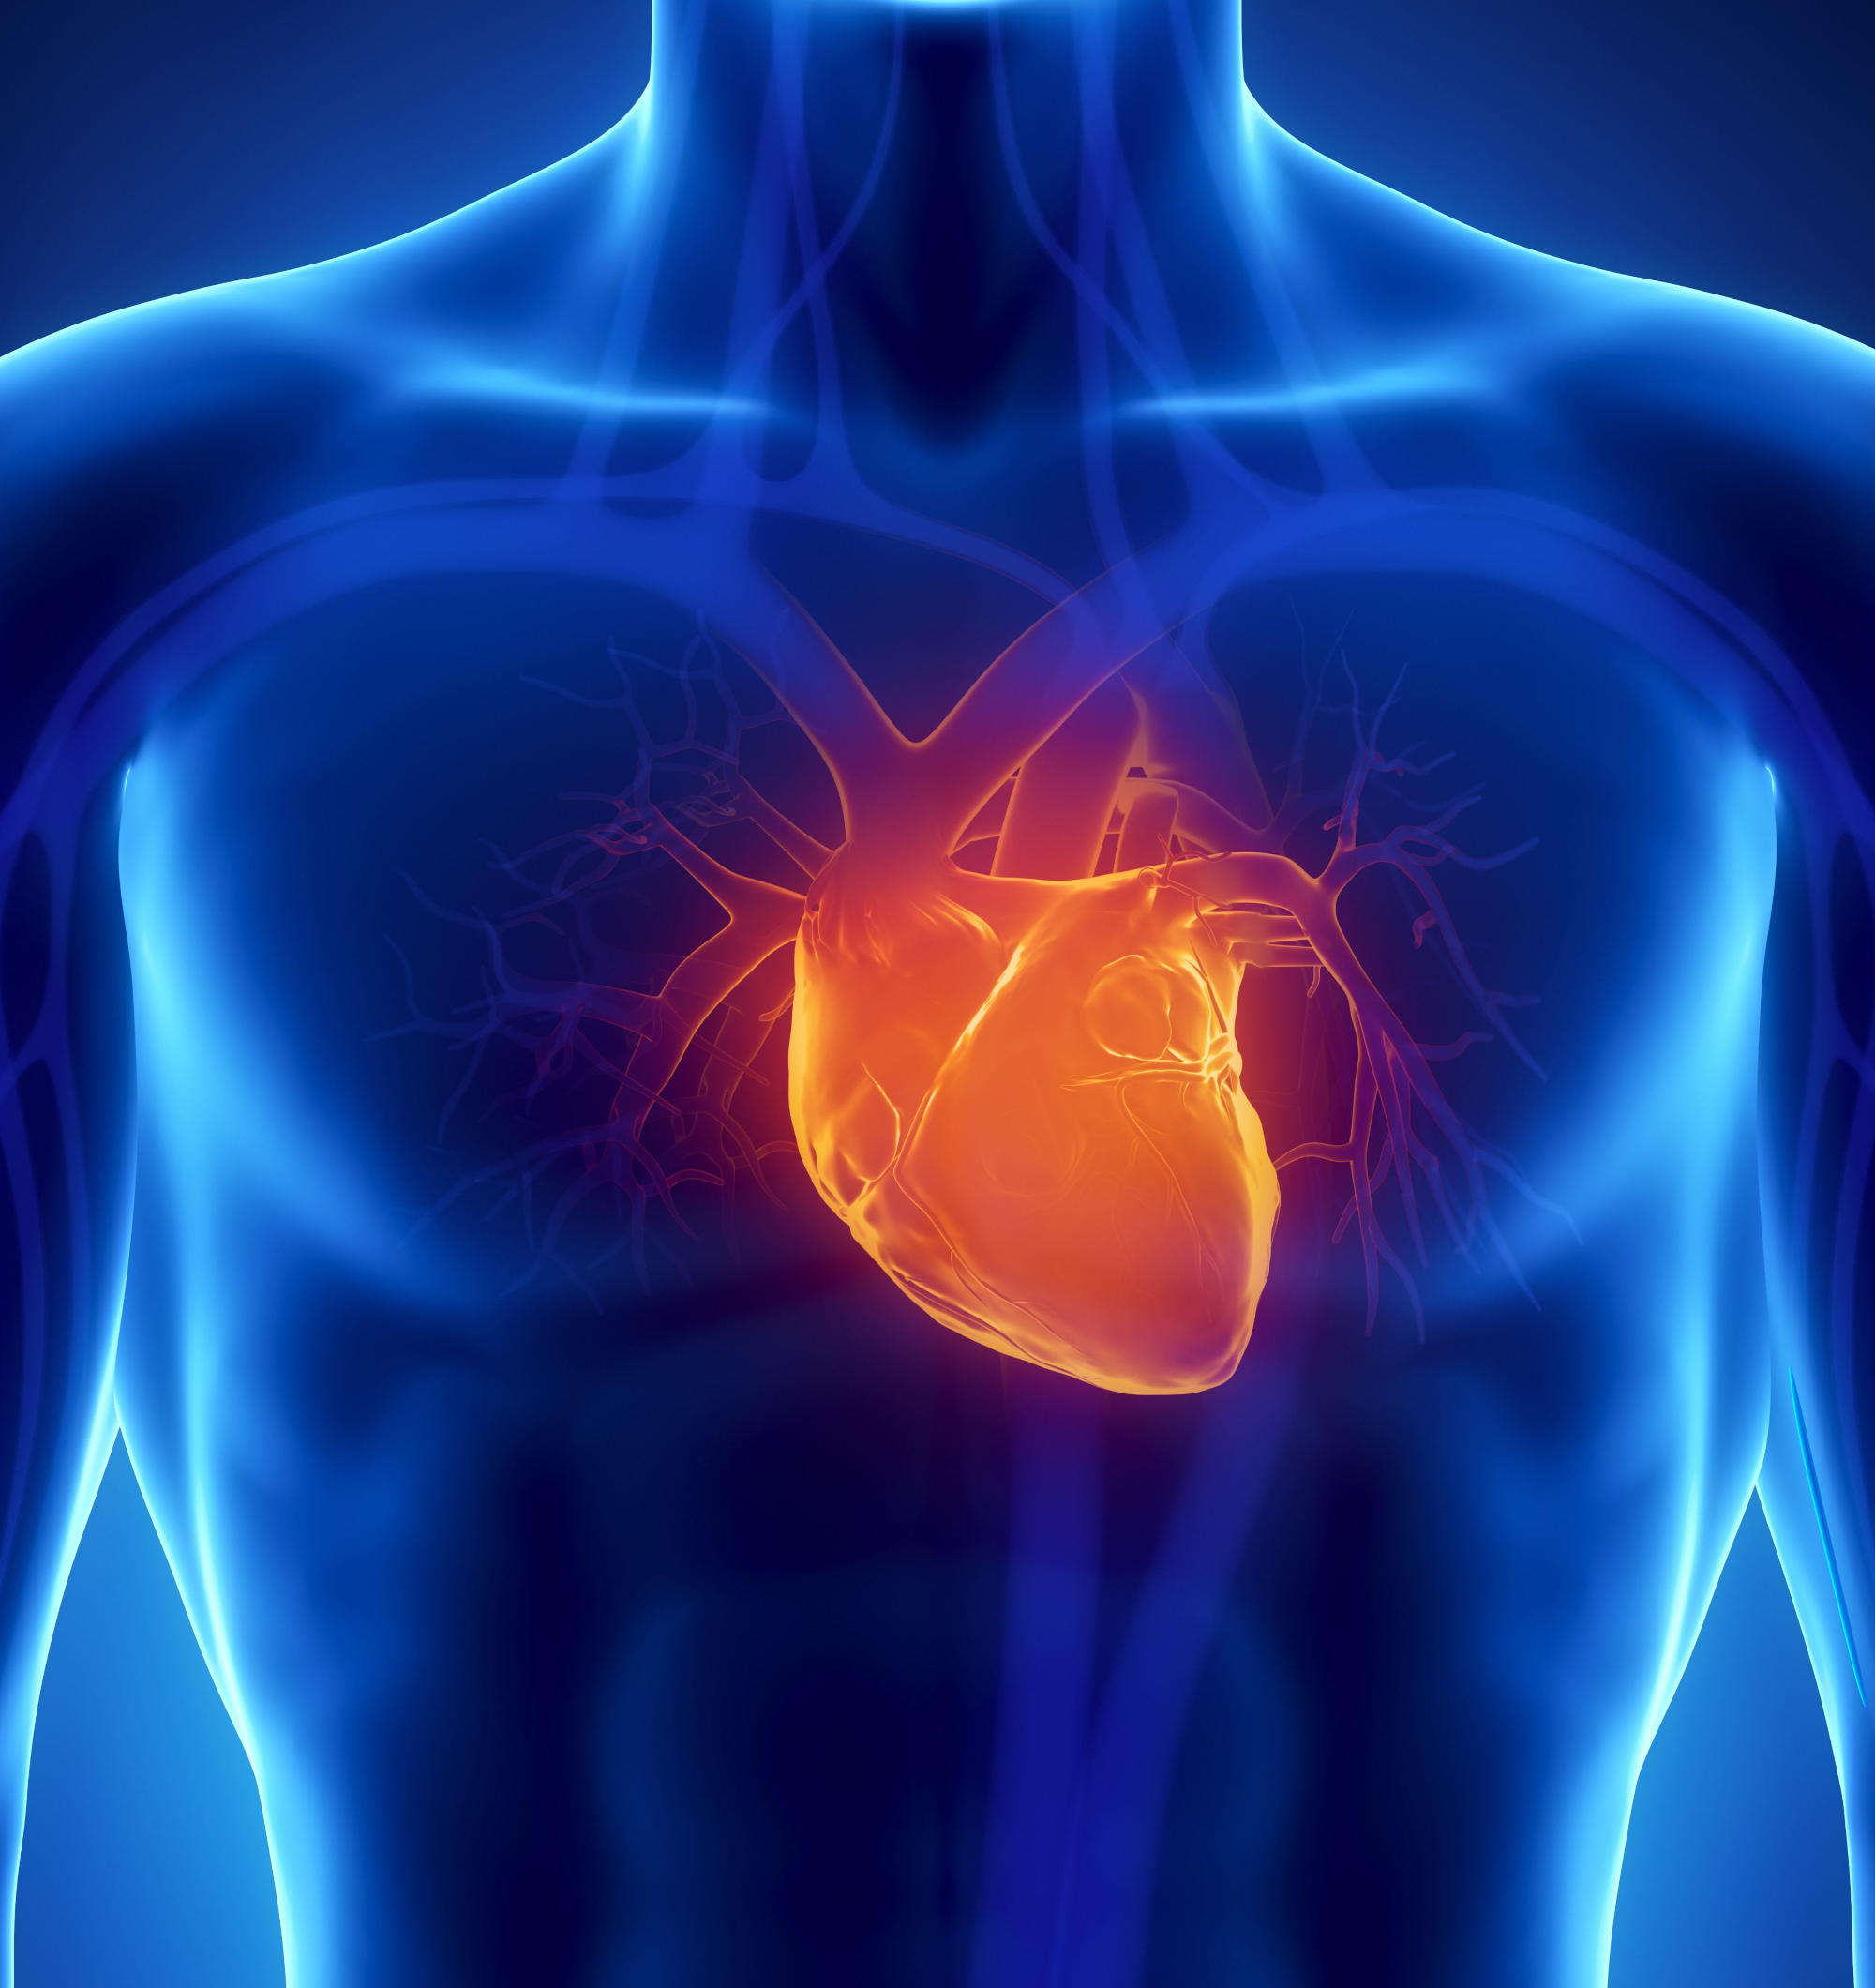 “Remarkable” Results – Scientists Discover That a Dietary Supplement Could Fix a Broken Heart - SciTechDaily